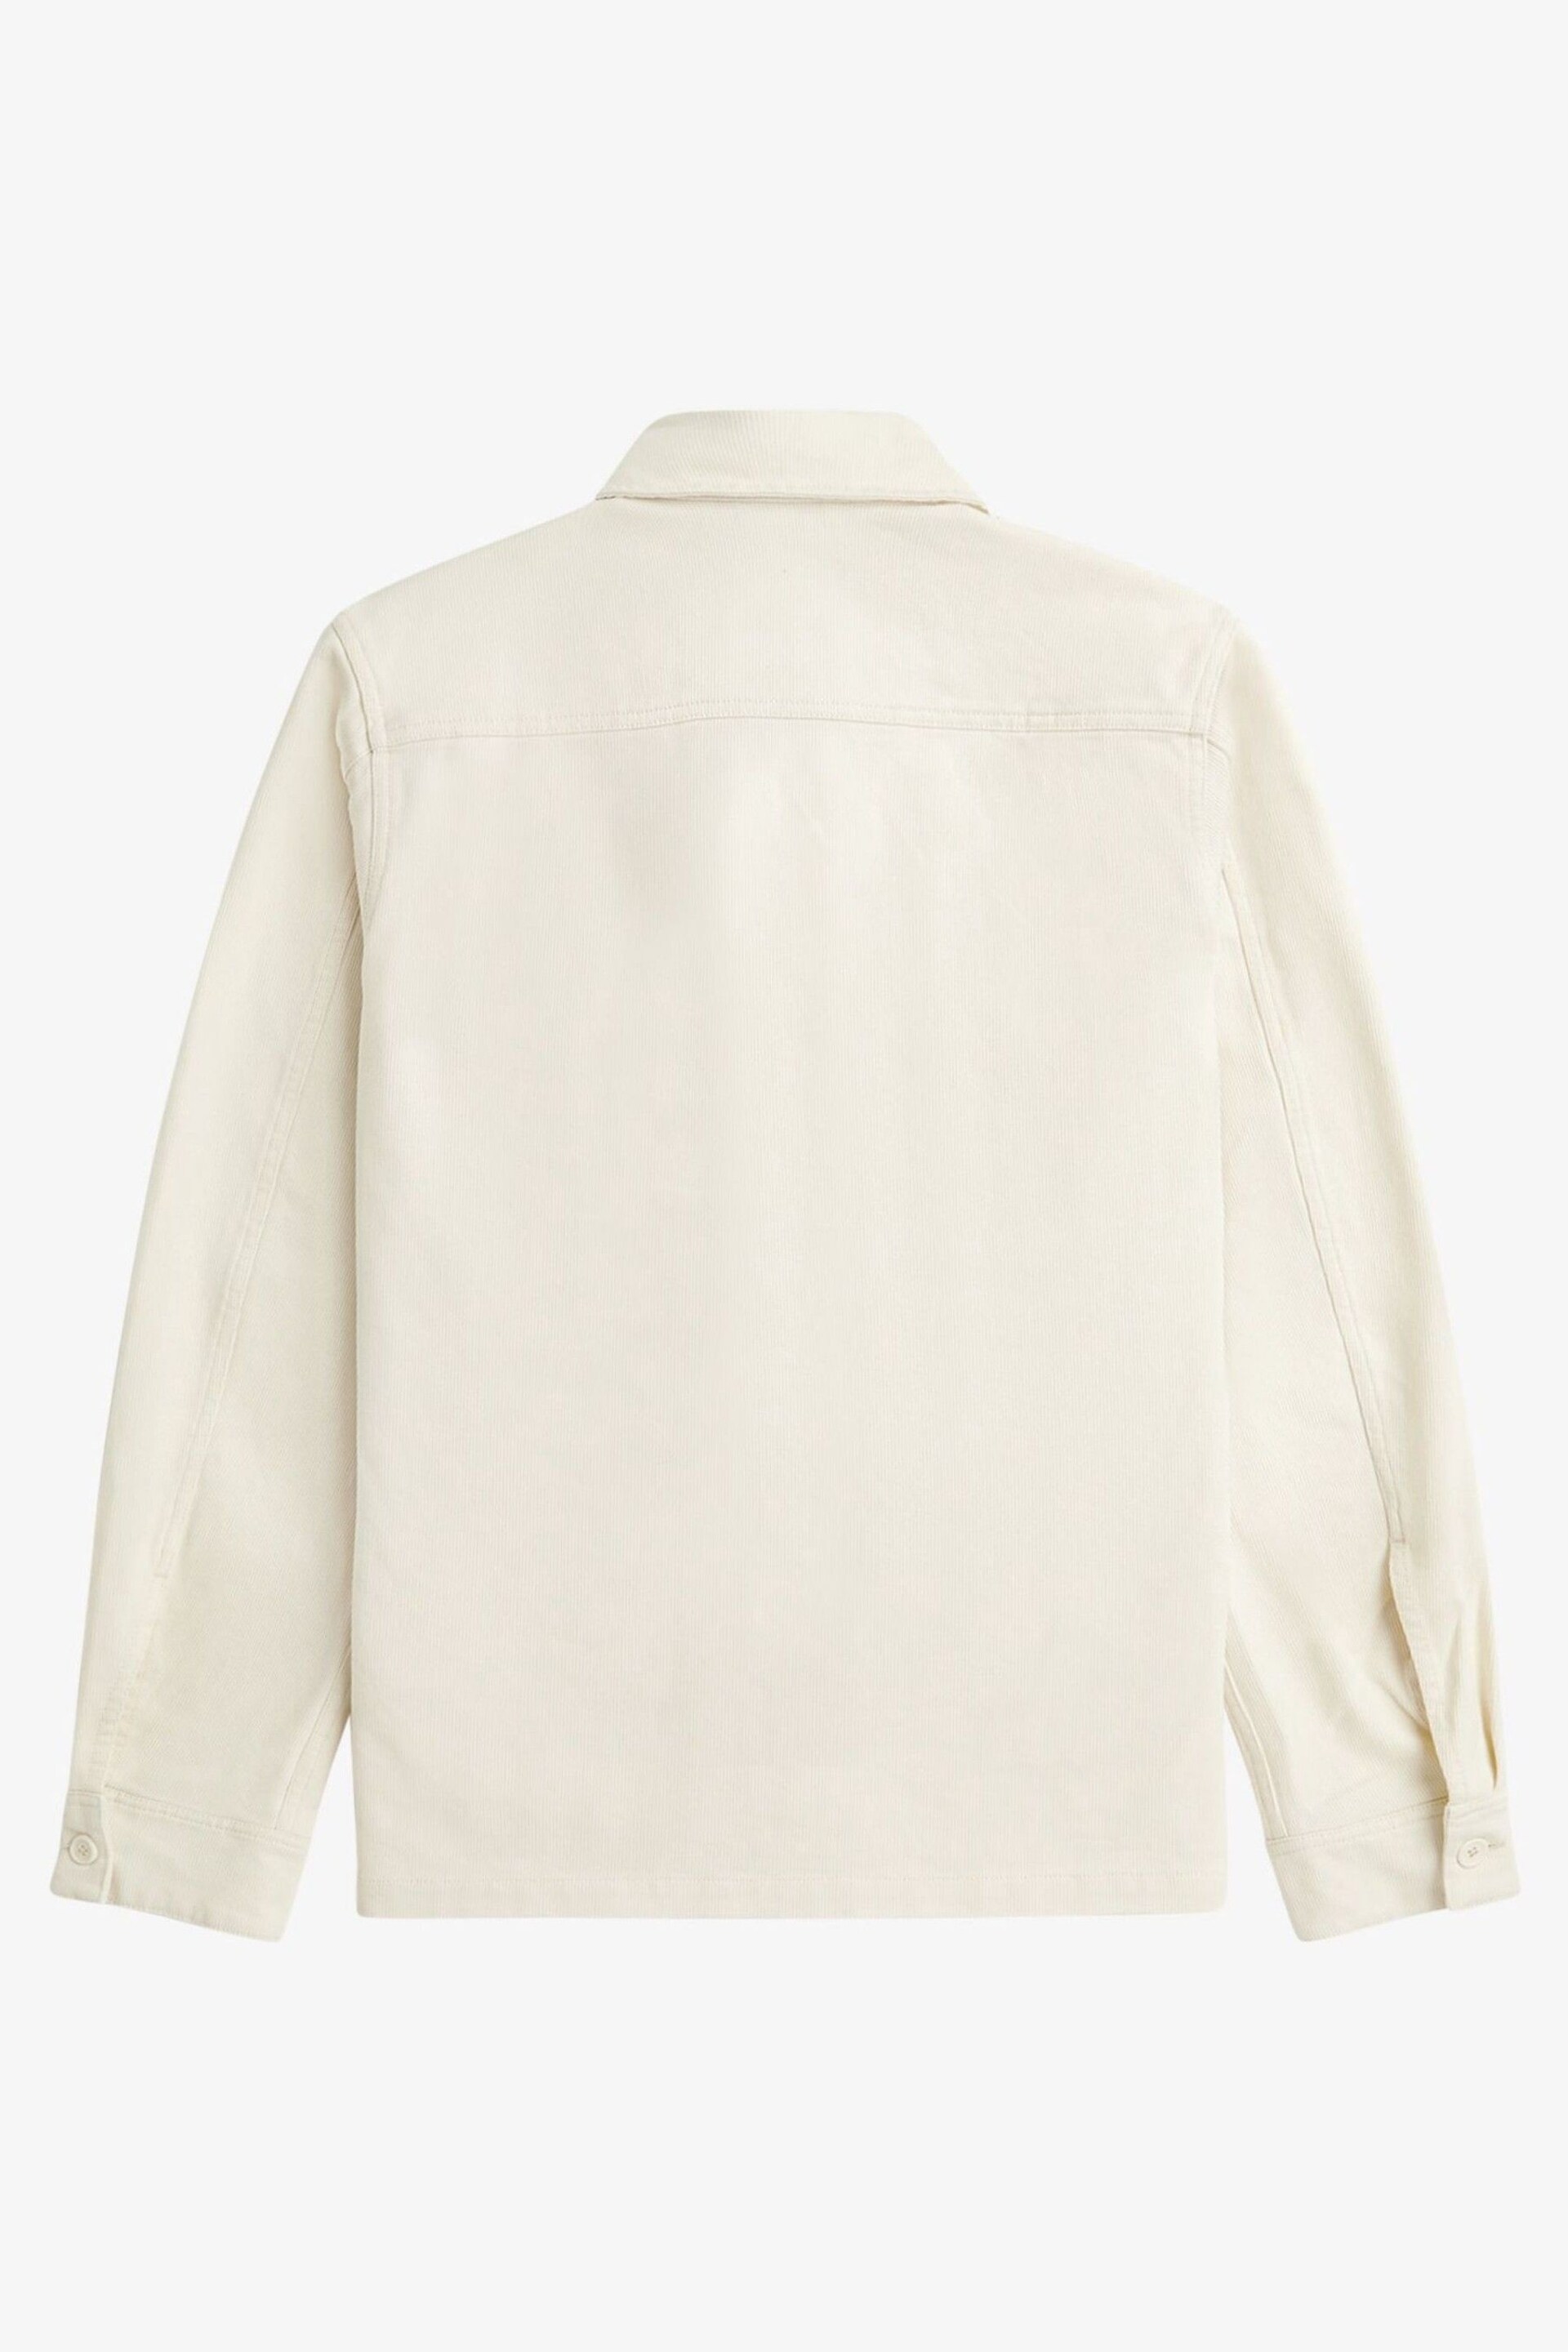 Fred Perry Ecru White Bedford Cord Overshirt - Image 6 of 6